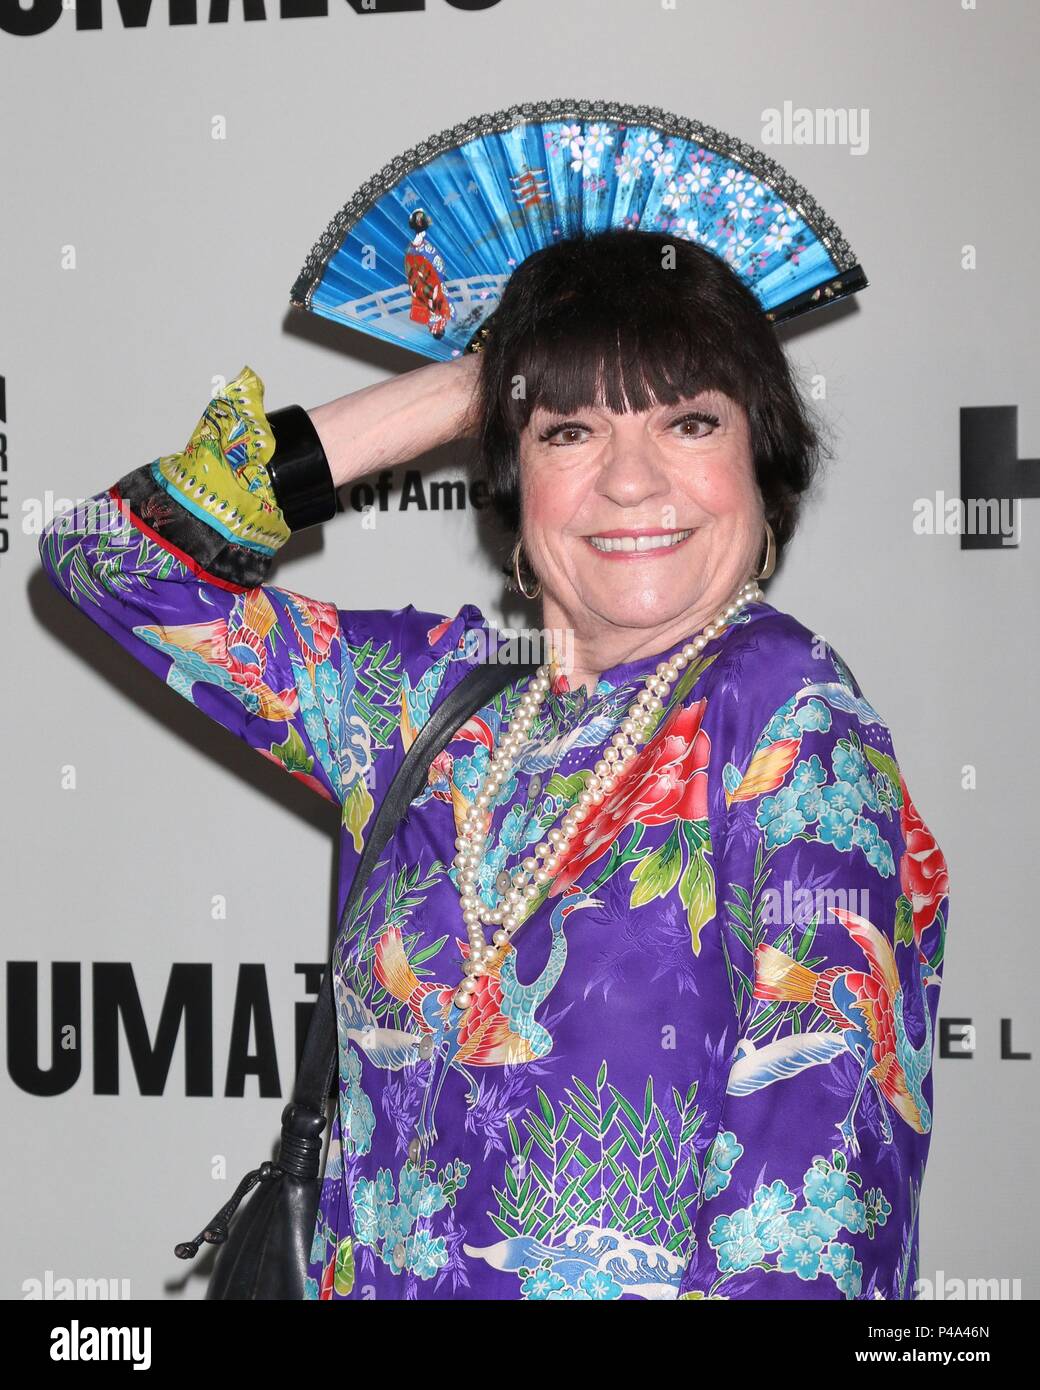 Los Angeles, CA, USA. 20th June, 2018. Jo Anne Worley at arrivals for THE HUMANS Opening Night, Center Theatre Group - Ahmanson Theatre, Los Angeles, CA June 20, 2018. Credit: Priscilla Grant/Everett Collection/Alamy Live News Stock Photo